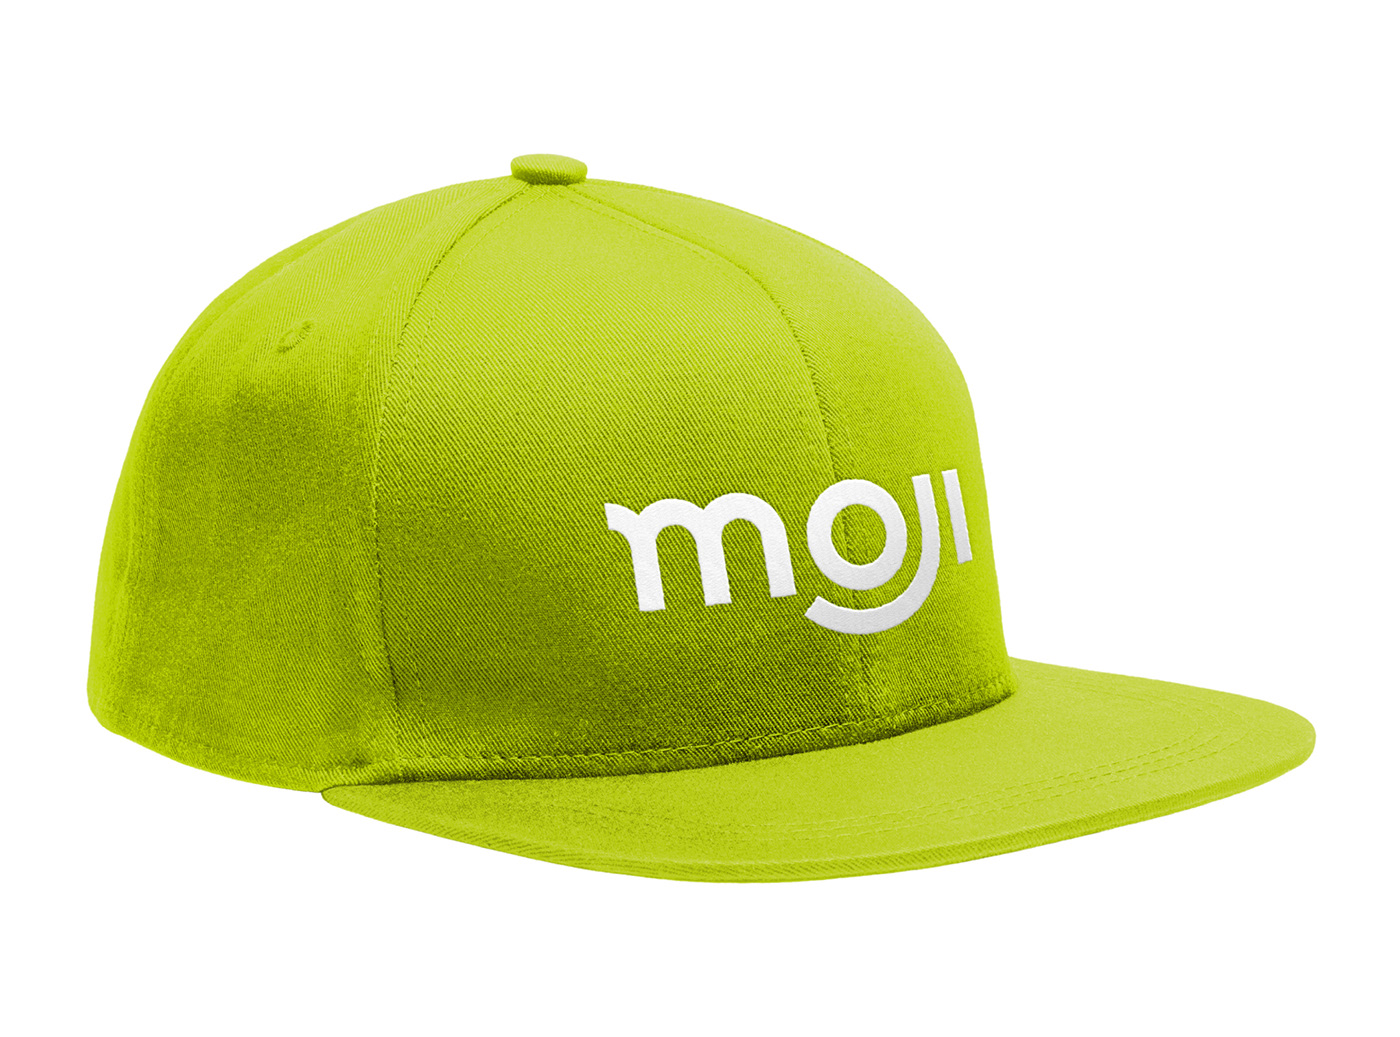 Branded hat concept as part of Moji Coffee & More employee uniforms